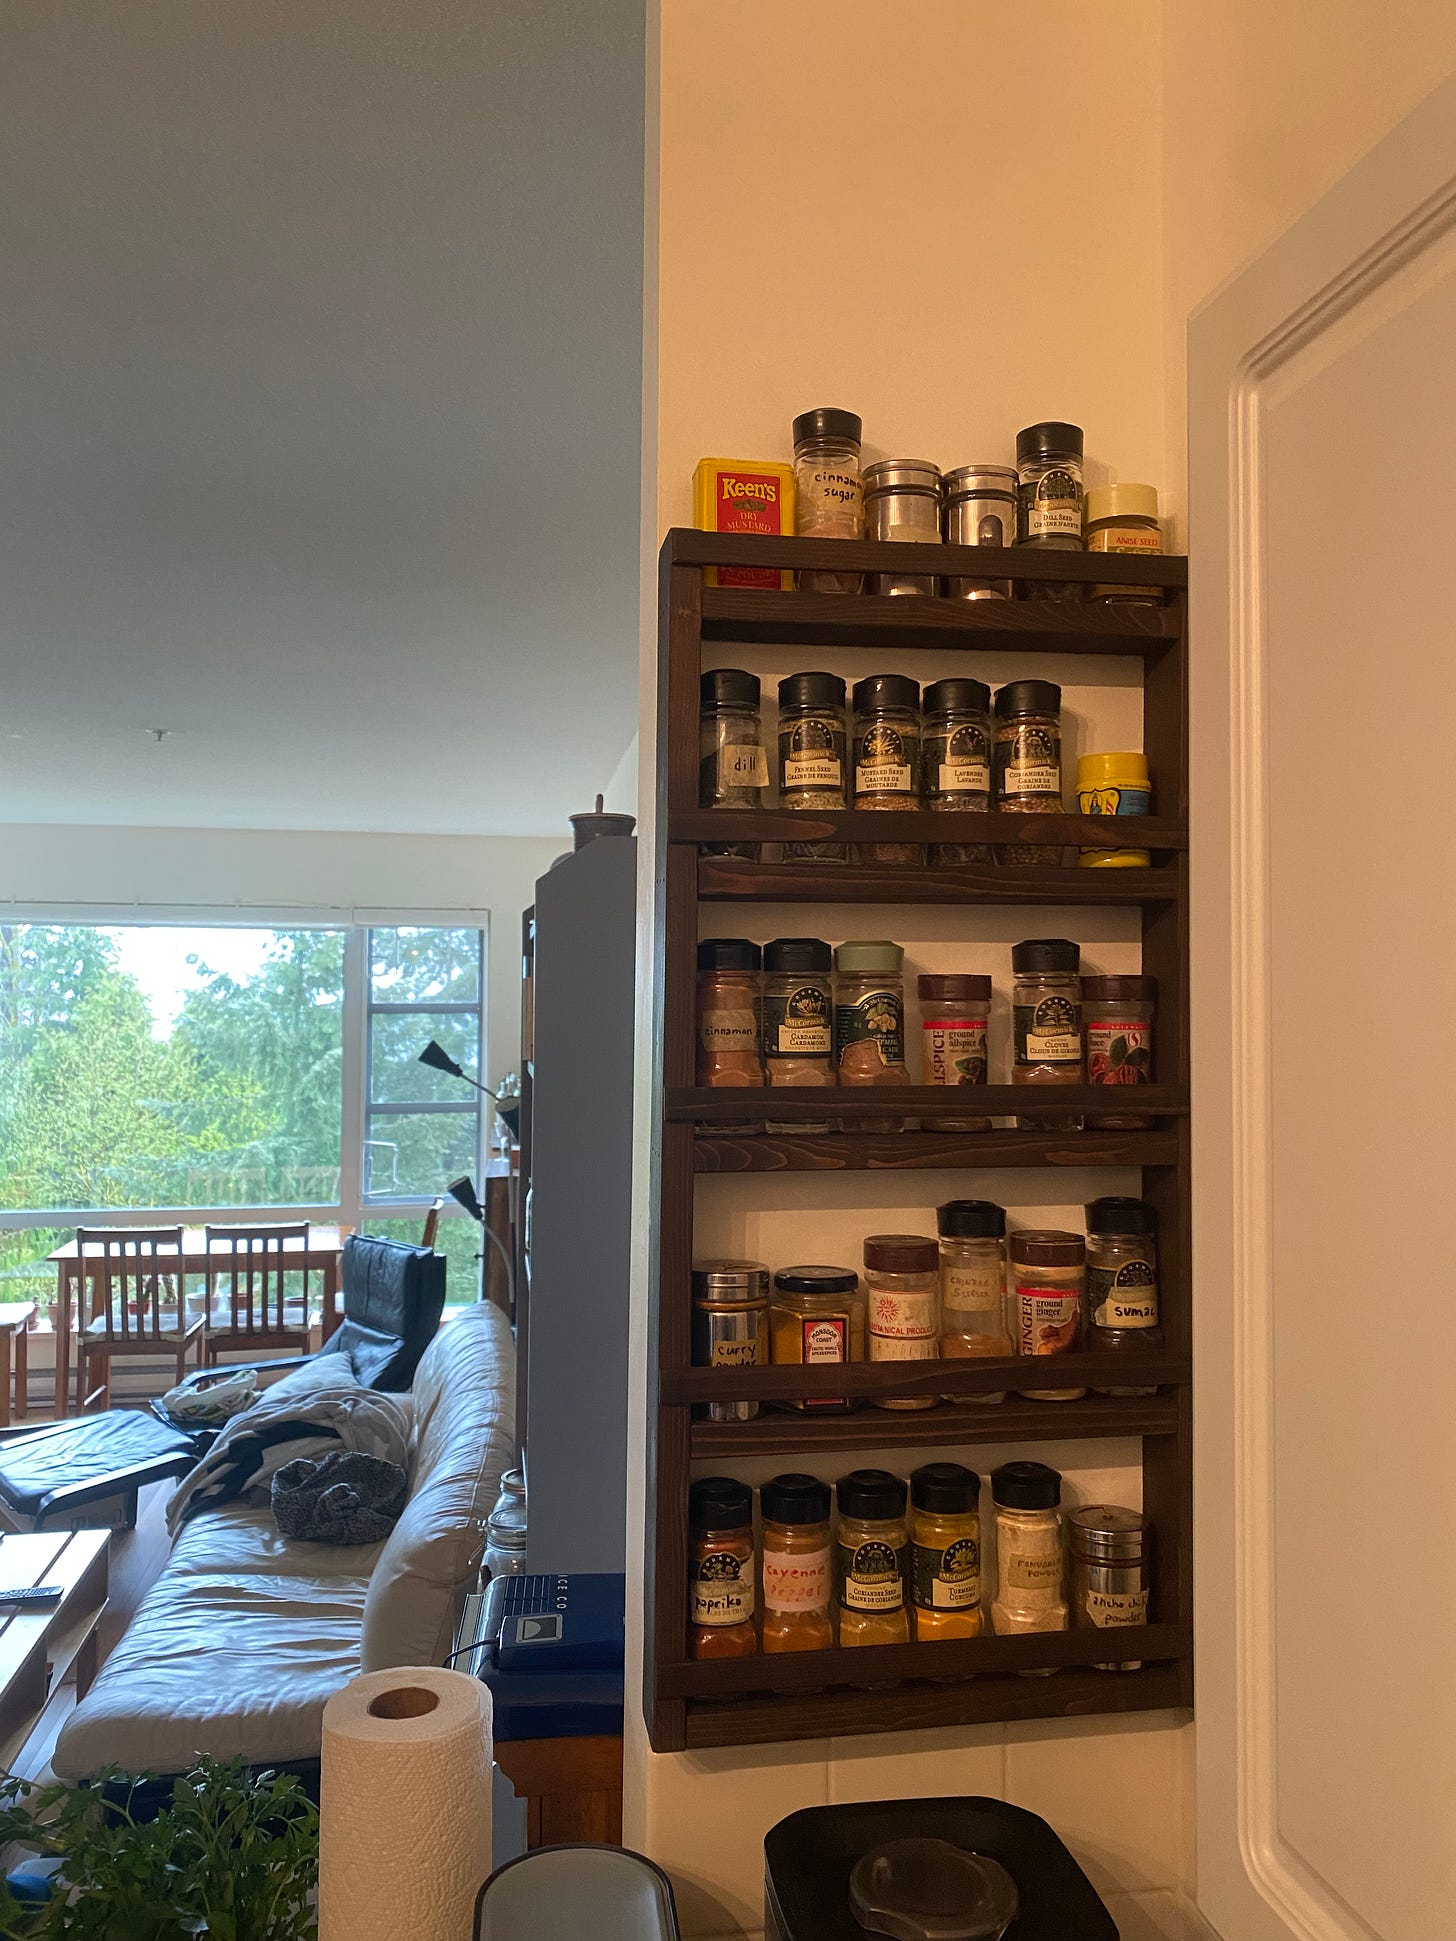 A section of kitchen wall with a wood spice rack mounted on it, with five shelves of various shapes and sizes of spice containers. In the background the couch and dining table are visible.